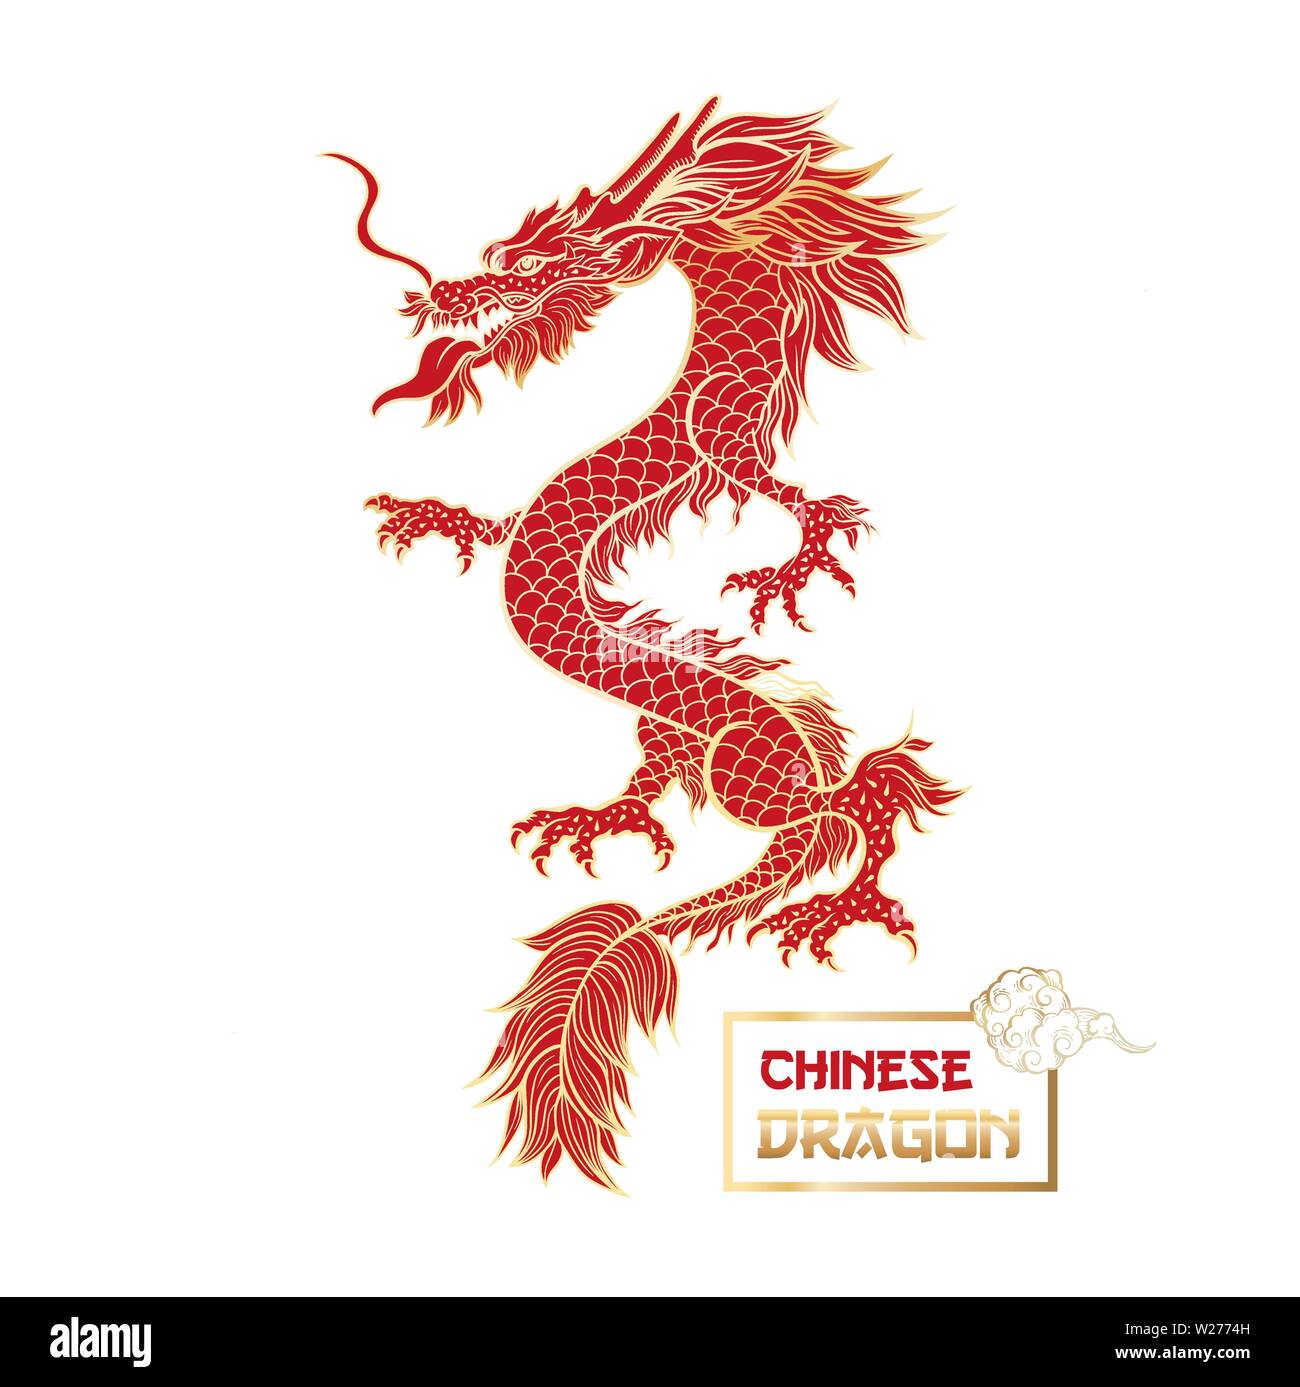 Chinese red dragon hand drawn illustration. Asian mythology serpent. Traditional oriental mystic red creature with gold ink outline. Legendary fantasy animal. Chinese New Year greeting card design Stock Vector